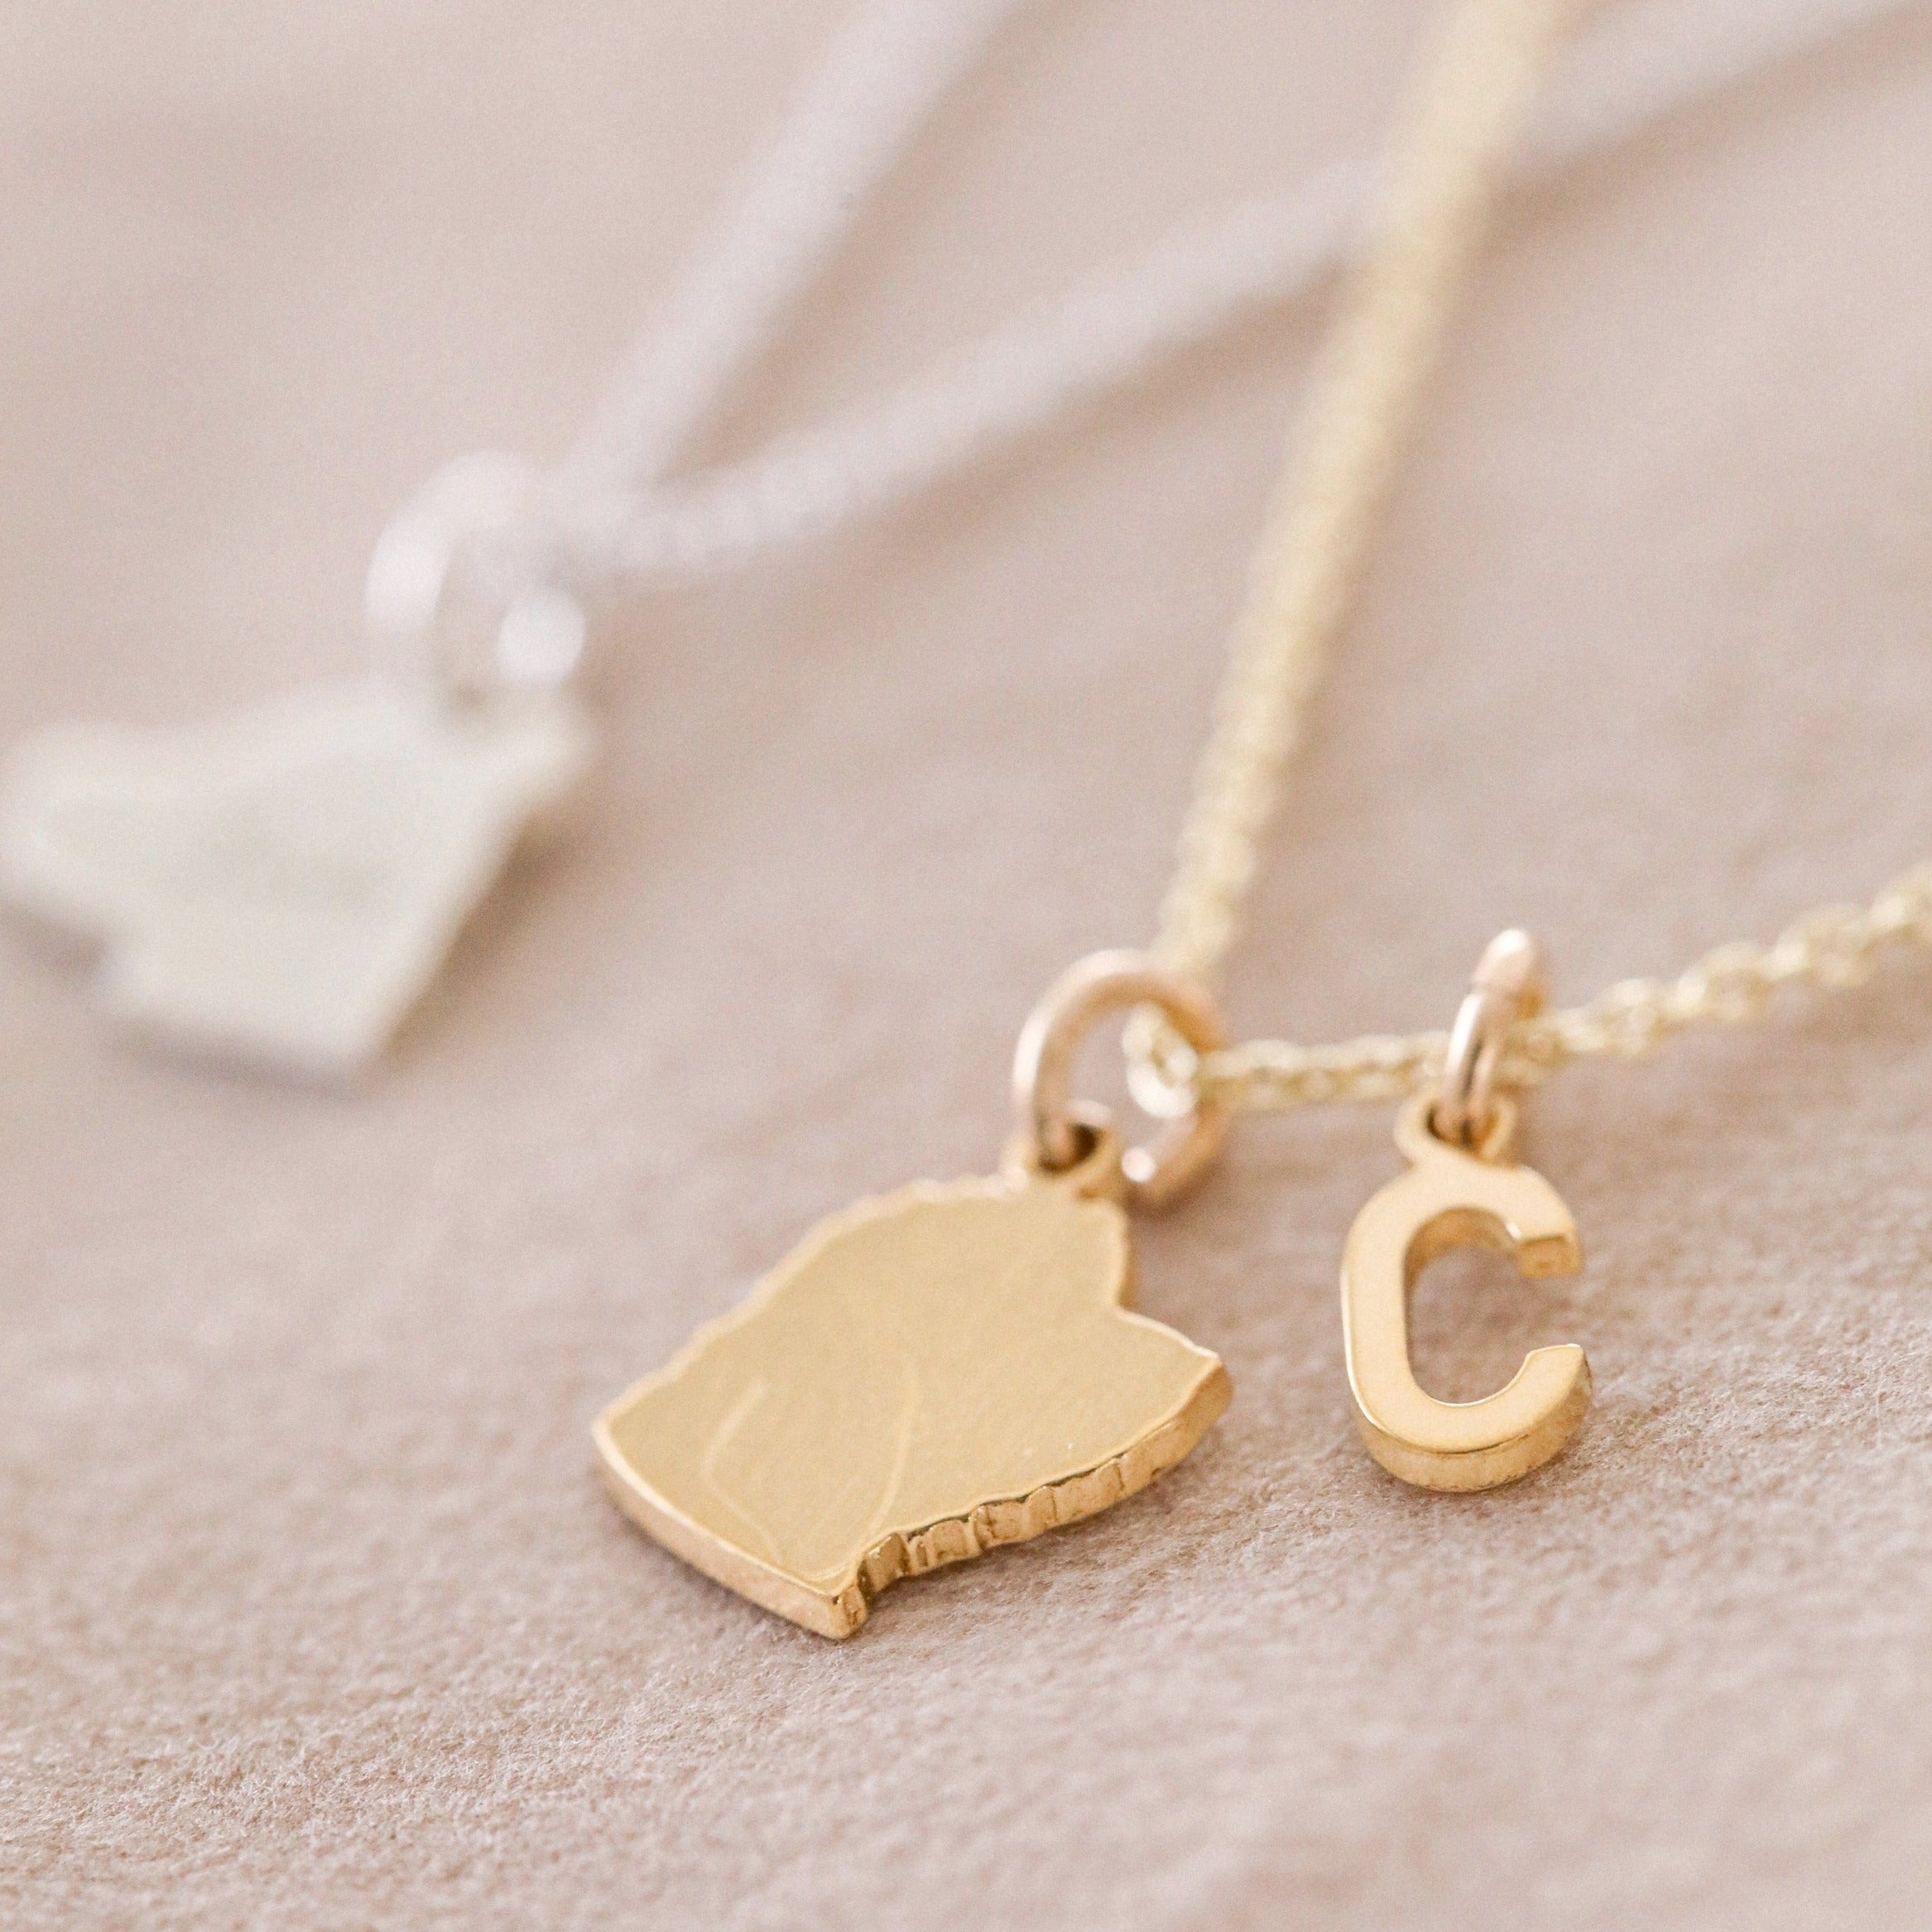 Side profile of your pet handmade into a pet silhouette pendant. The letter C inital charm is added for the first letter of the pets name